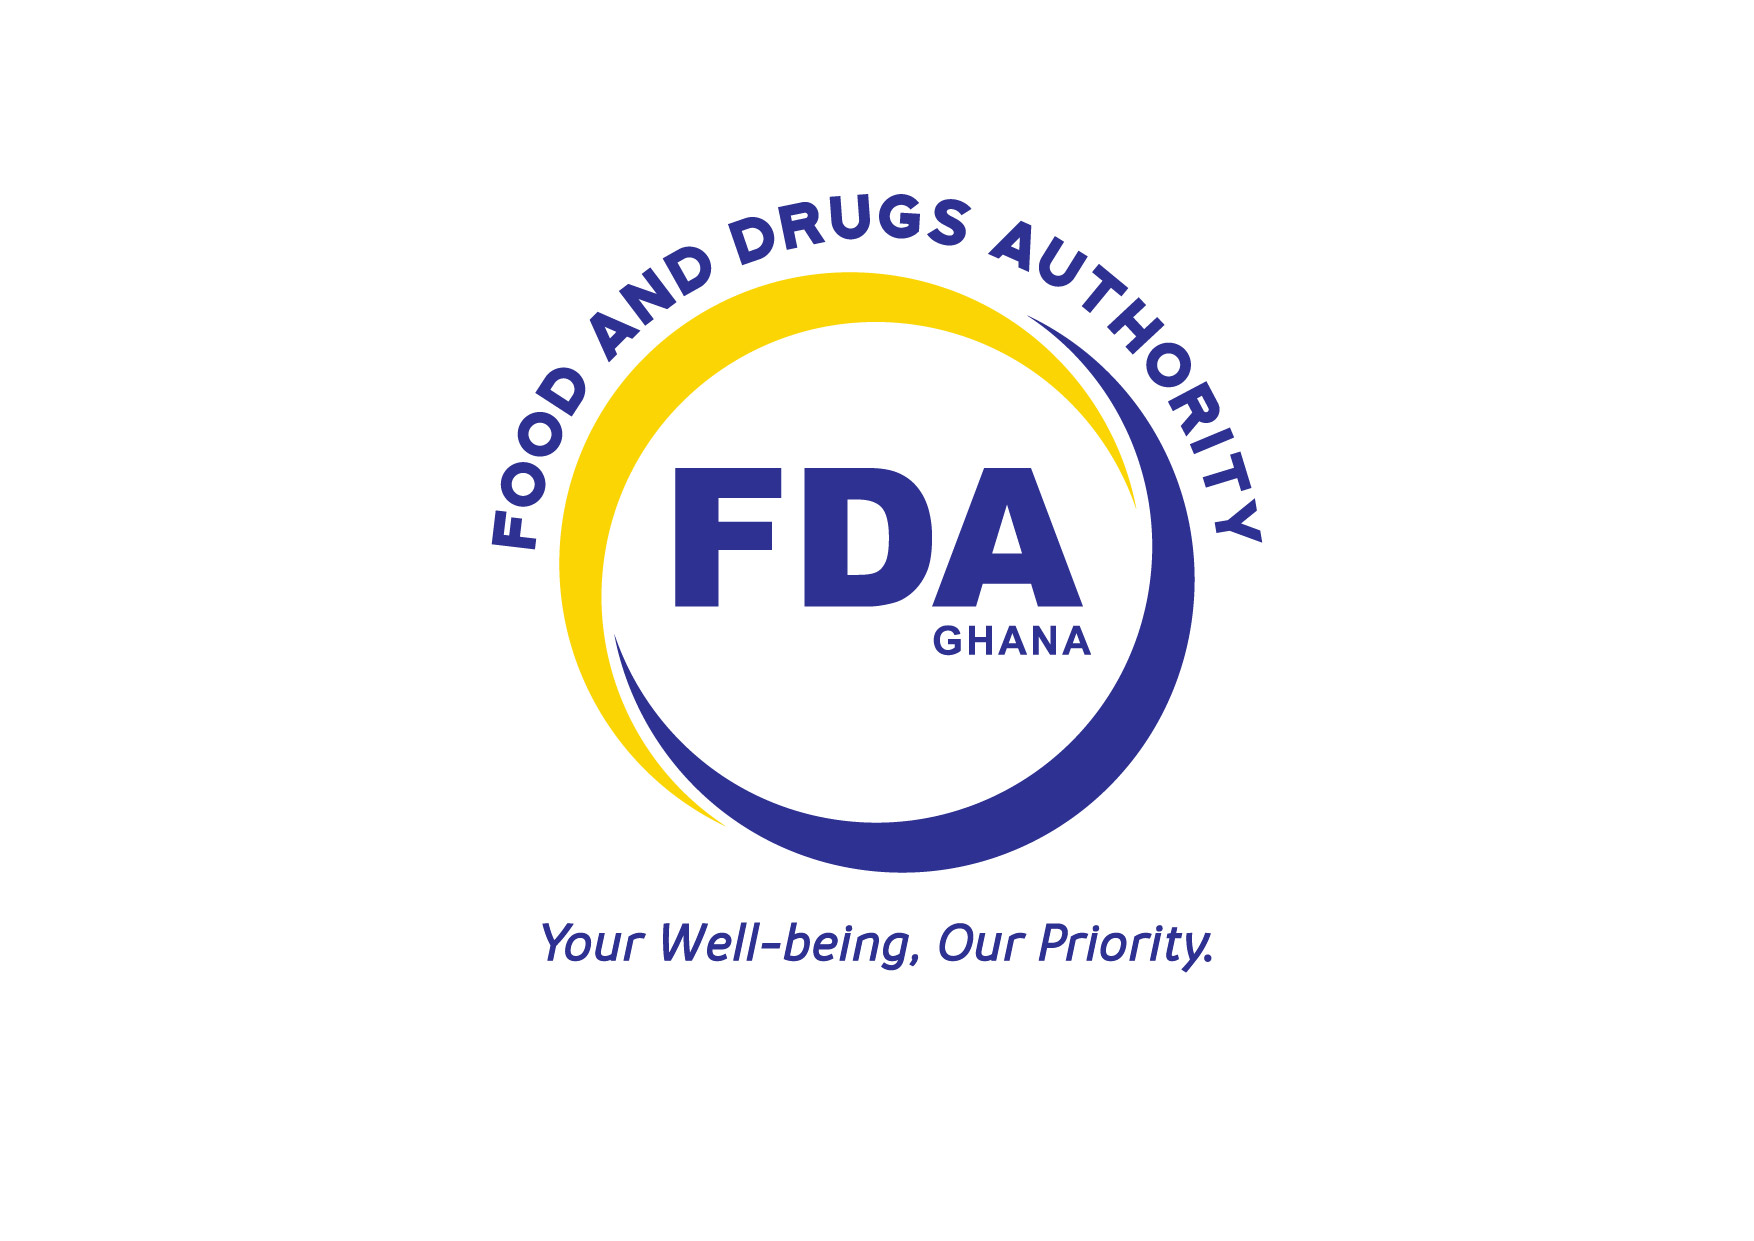 Tax policies on products with negative health impacts beneficial – FDA